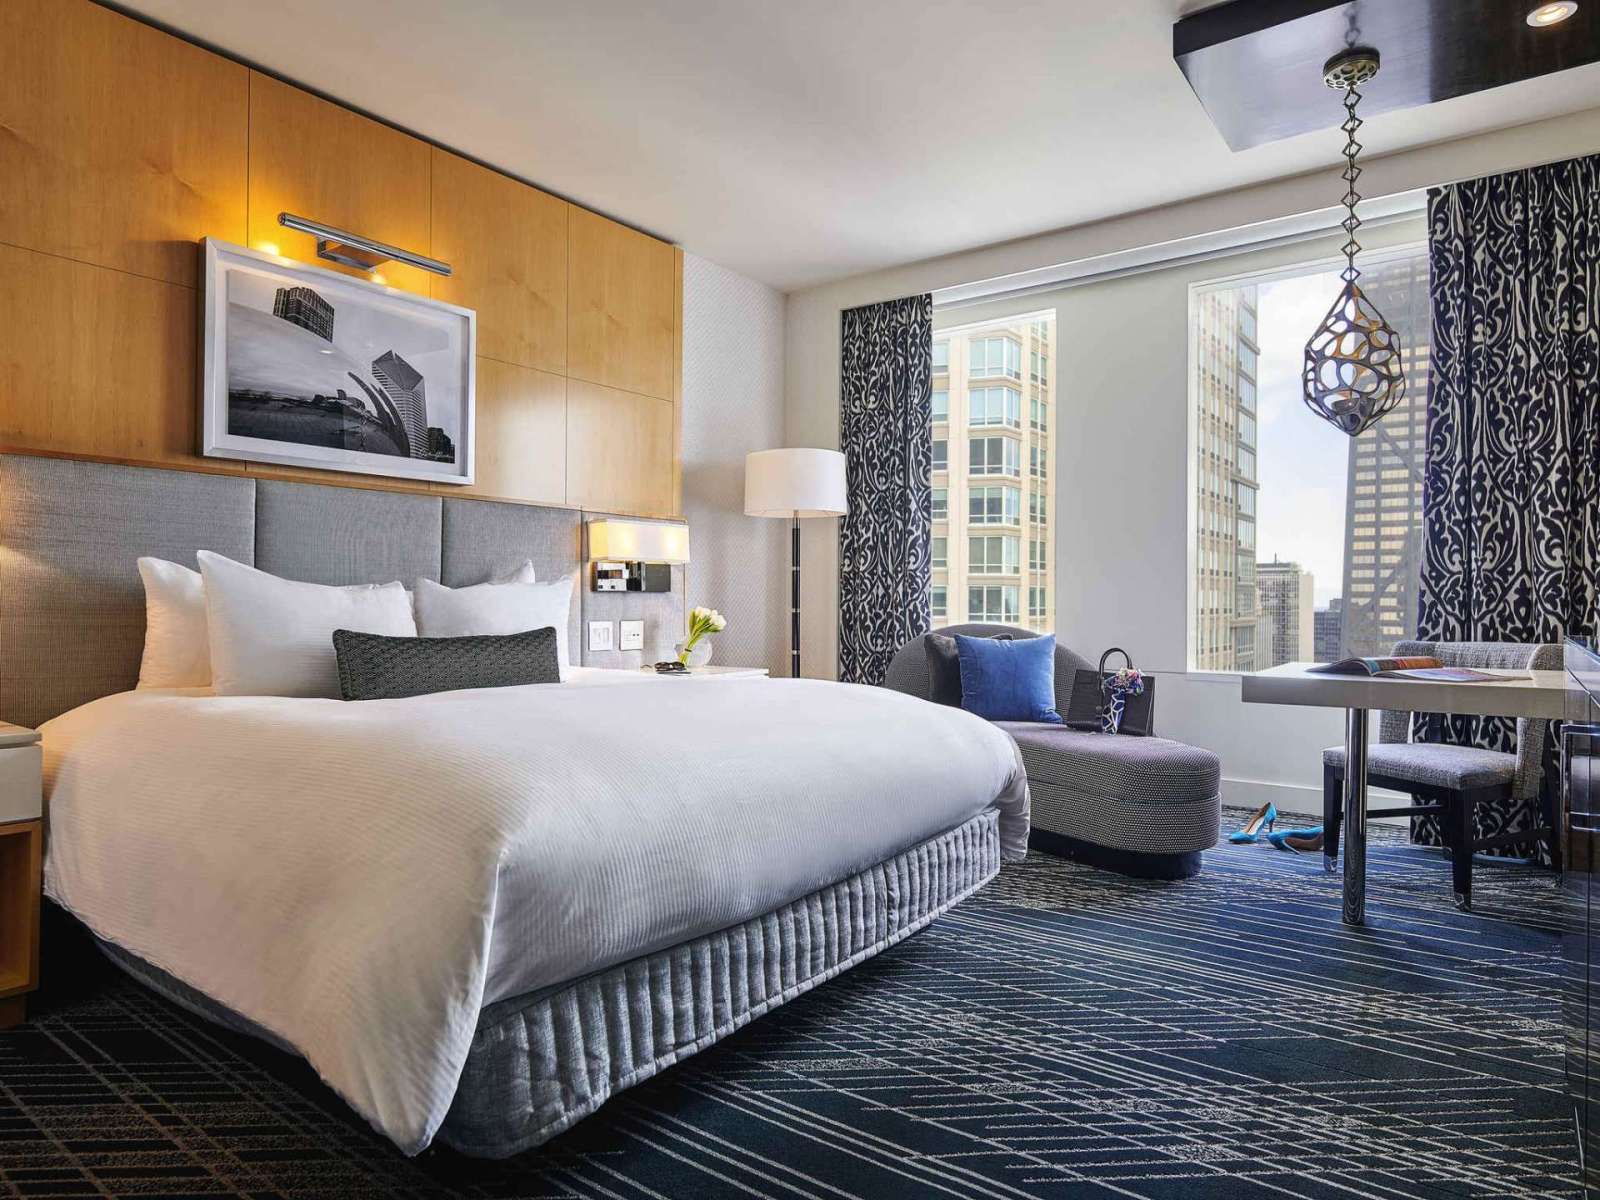 4th of July sale sofitel hotel guest room